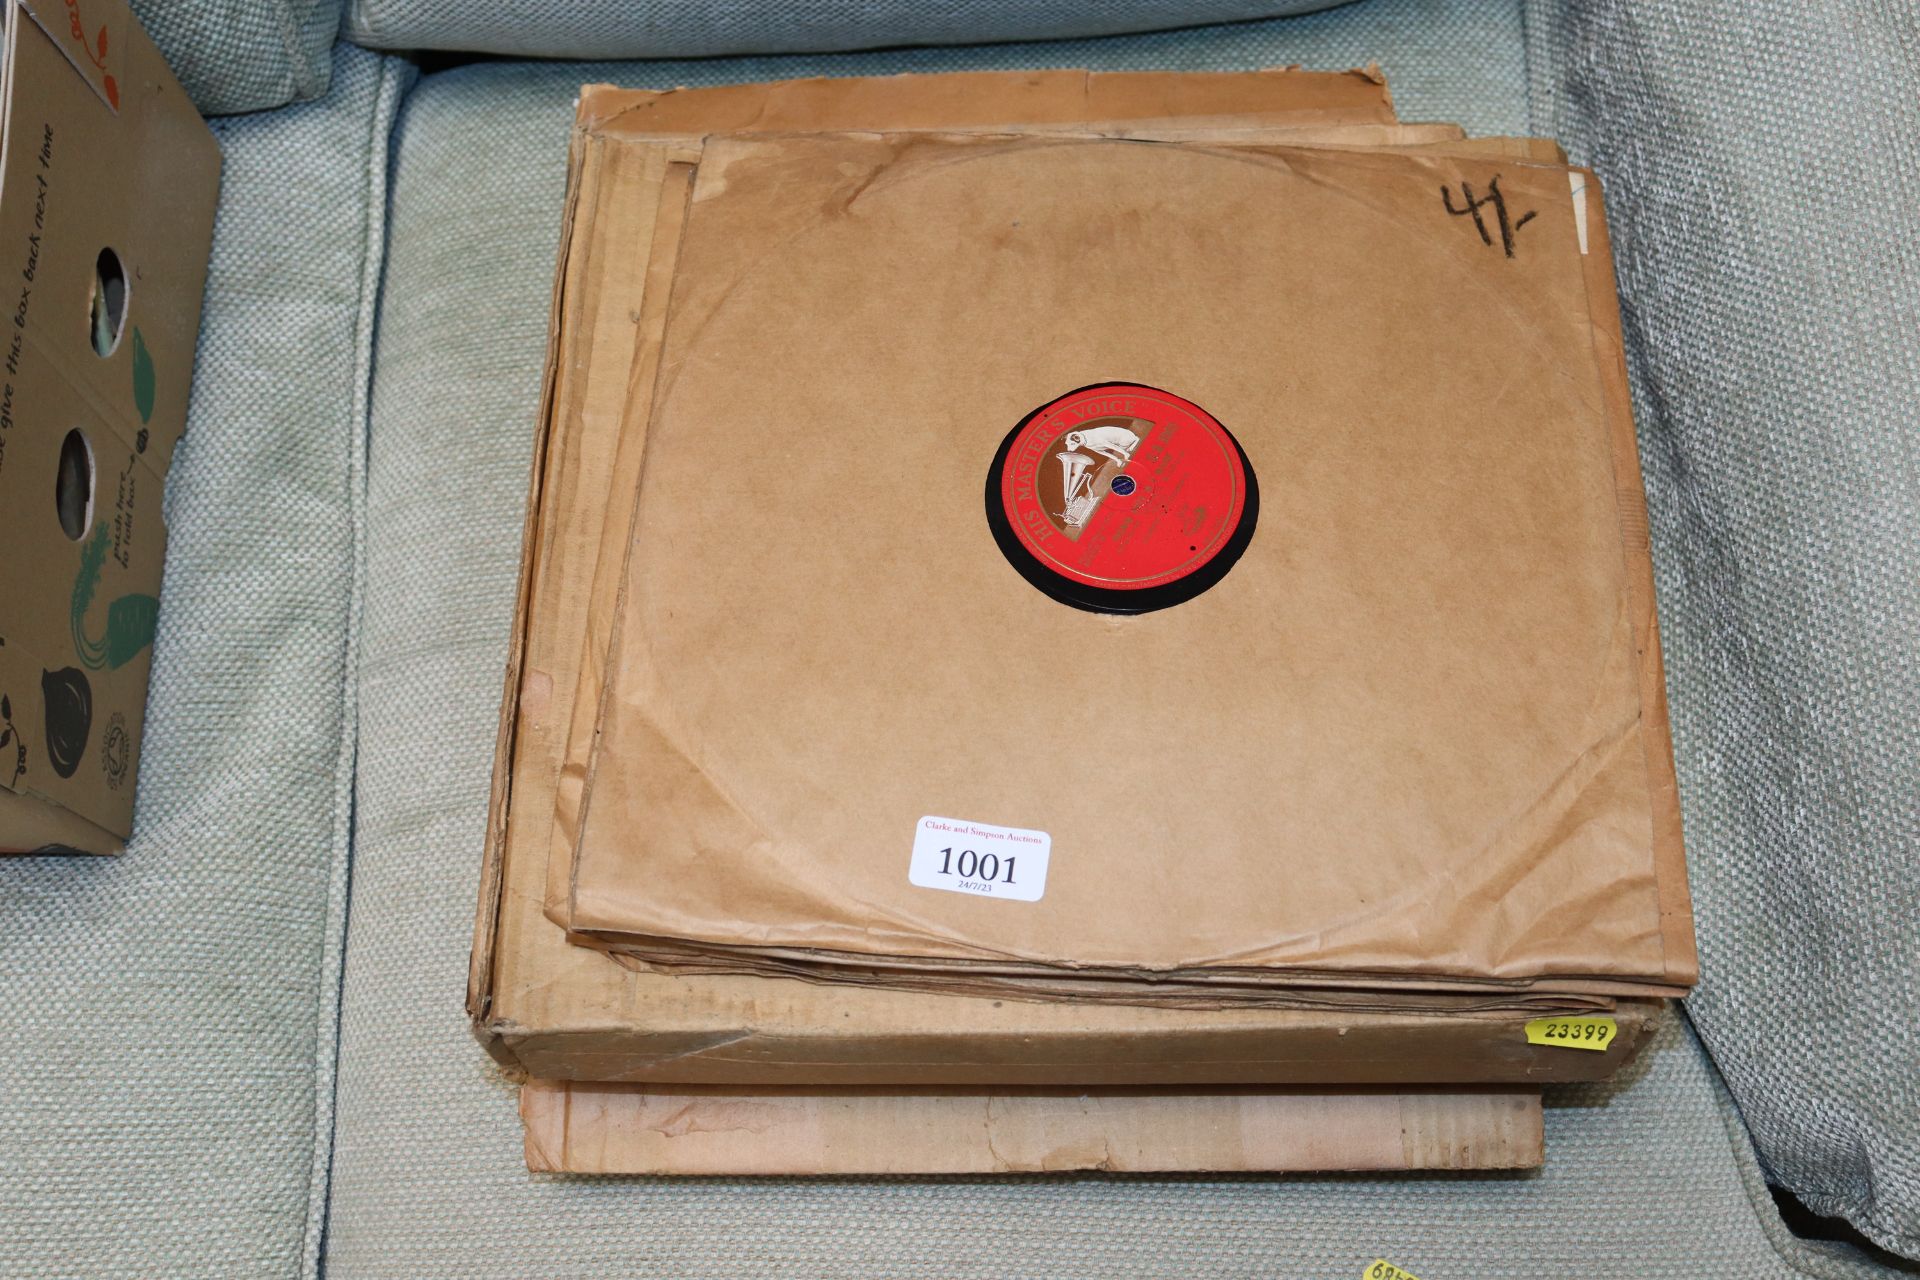 A collection of 78 RPM records